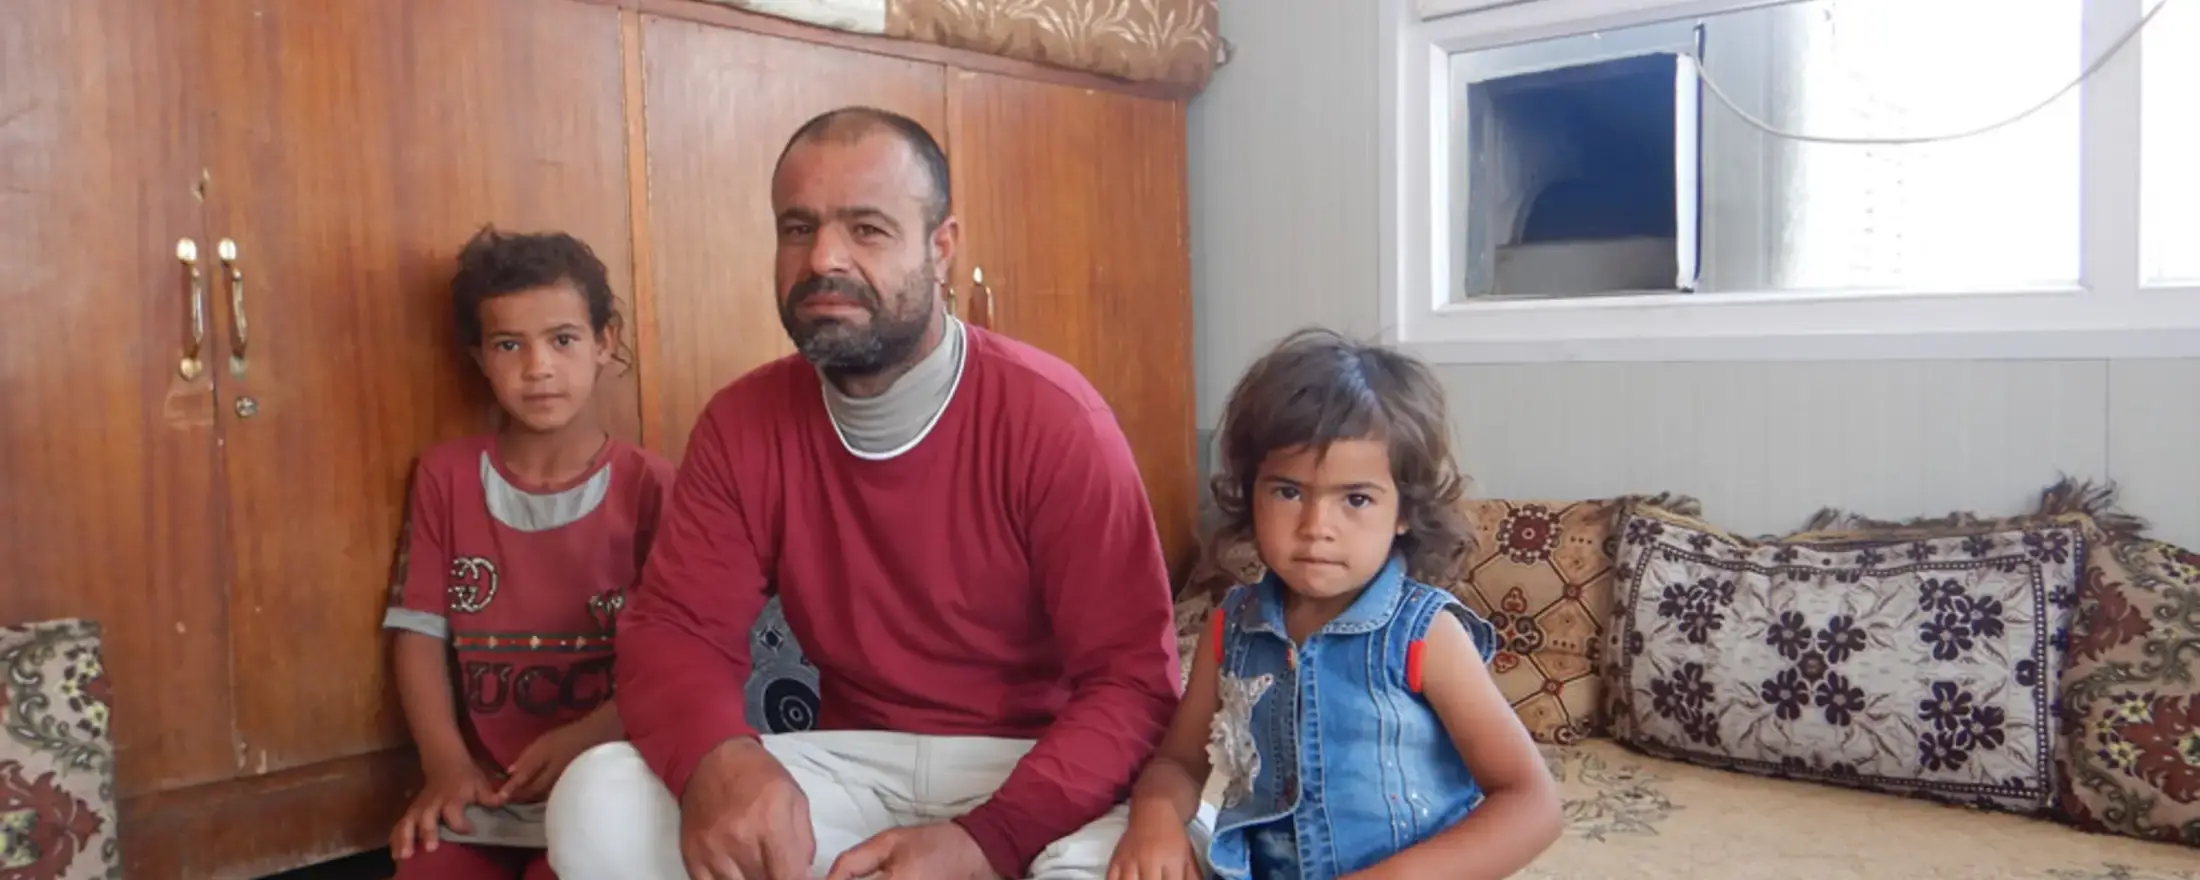 Former park squatter Suliman Hassan Matar and two of his children in their new home in Mosul, Iraq provided under an EU funded rehabilitation project run by UN-Habitat